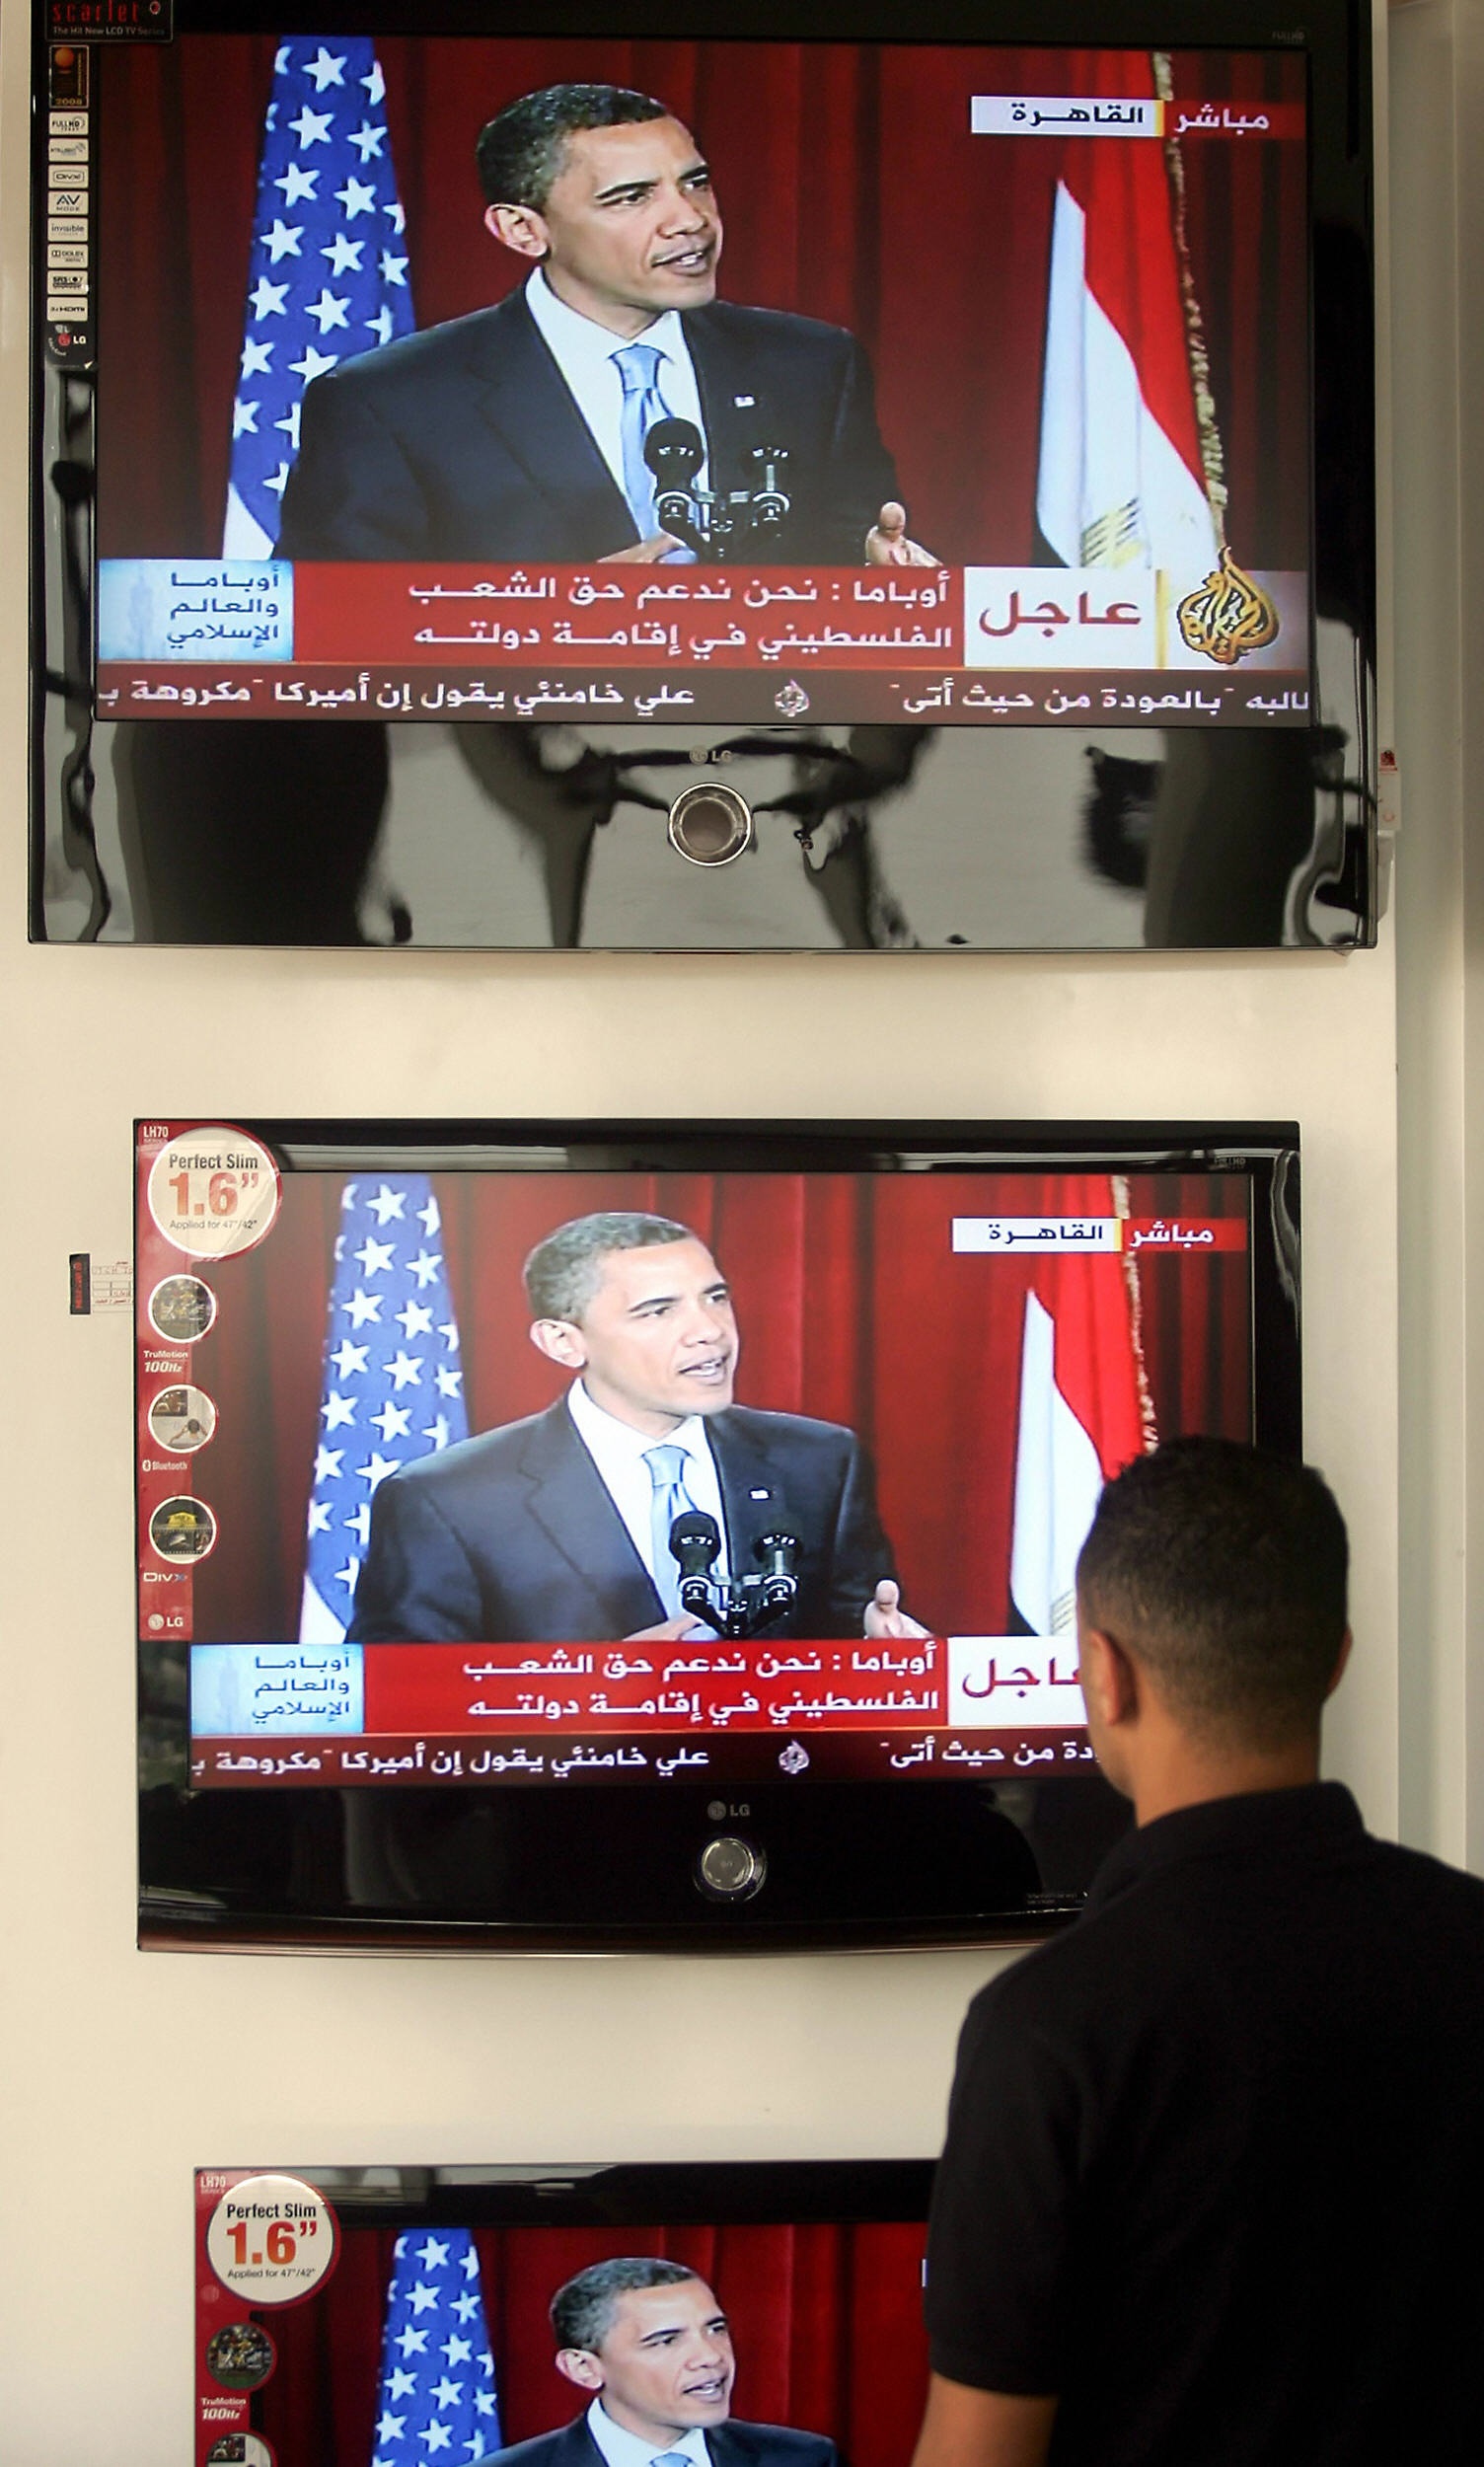 SAIF DAHLAH/AFP/Getty Images. A Palestinian man listens to US President Barack Obama as he delivers a speech at Cairo University, at an electronics shop in the West Bank city of Jenin on June 4, 2009. The Palestinian Authority hailed as a 'good beginning' Obama's speech to the Muslim world in which he reiterated his support of a Palestinian state.